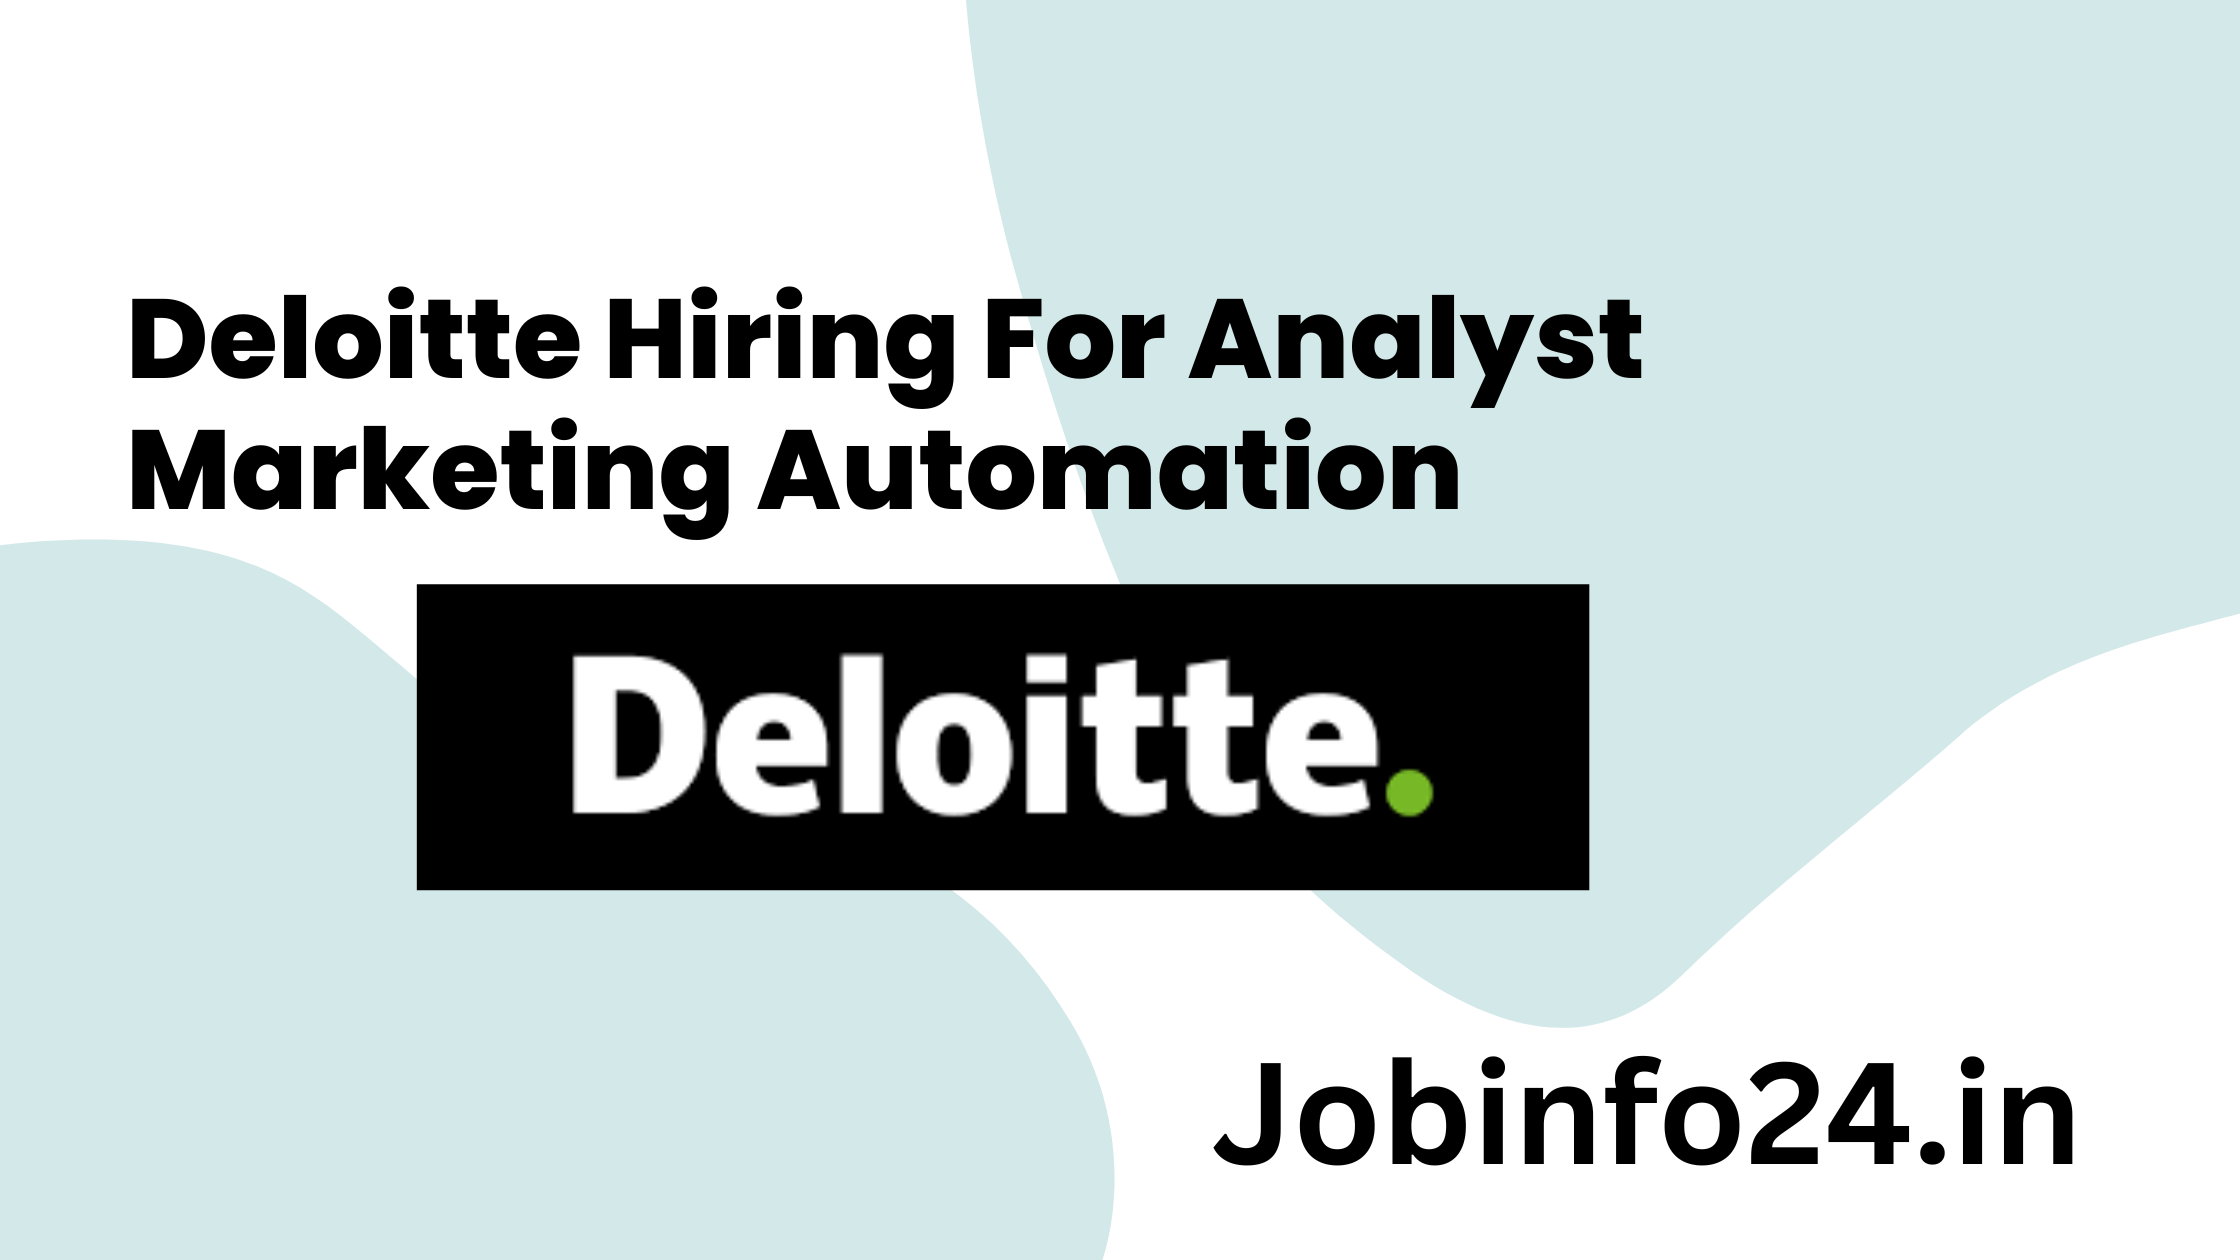 Deloitte Hiring For Analyst Marketing Automation